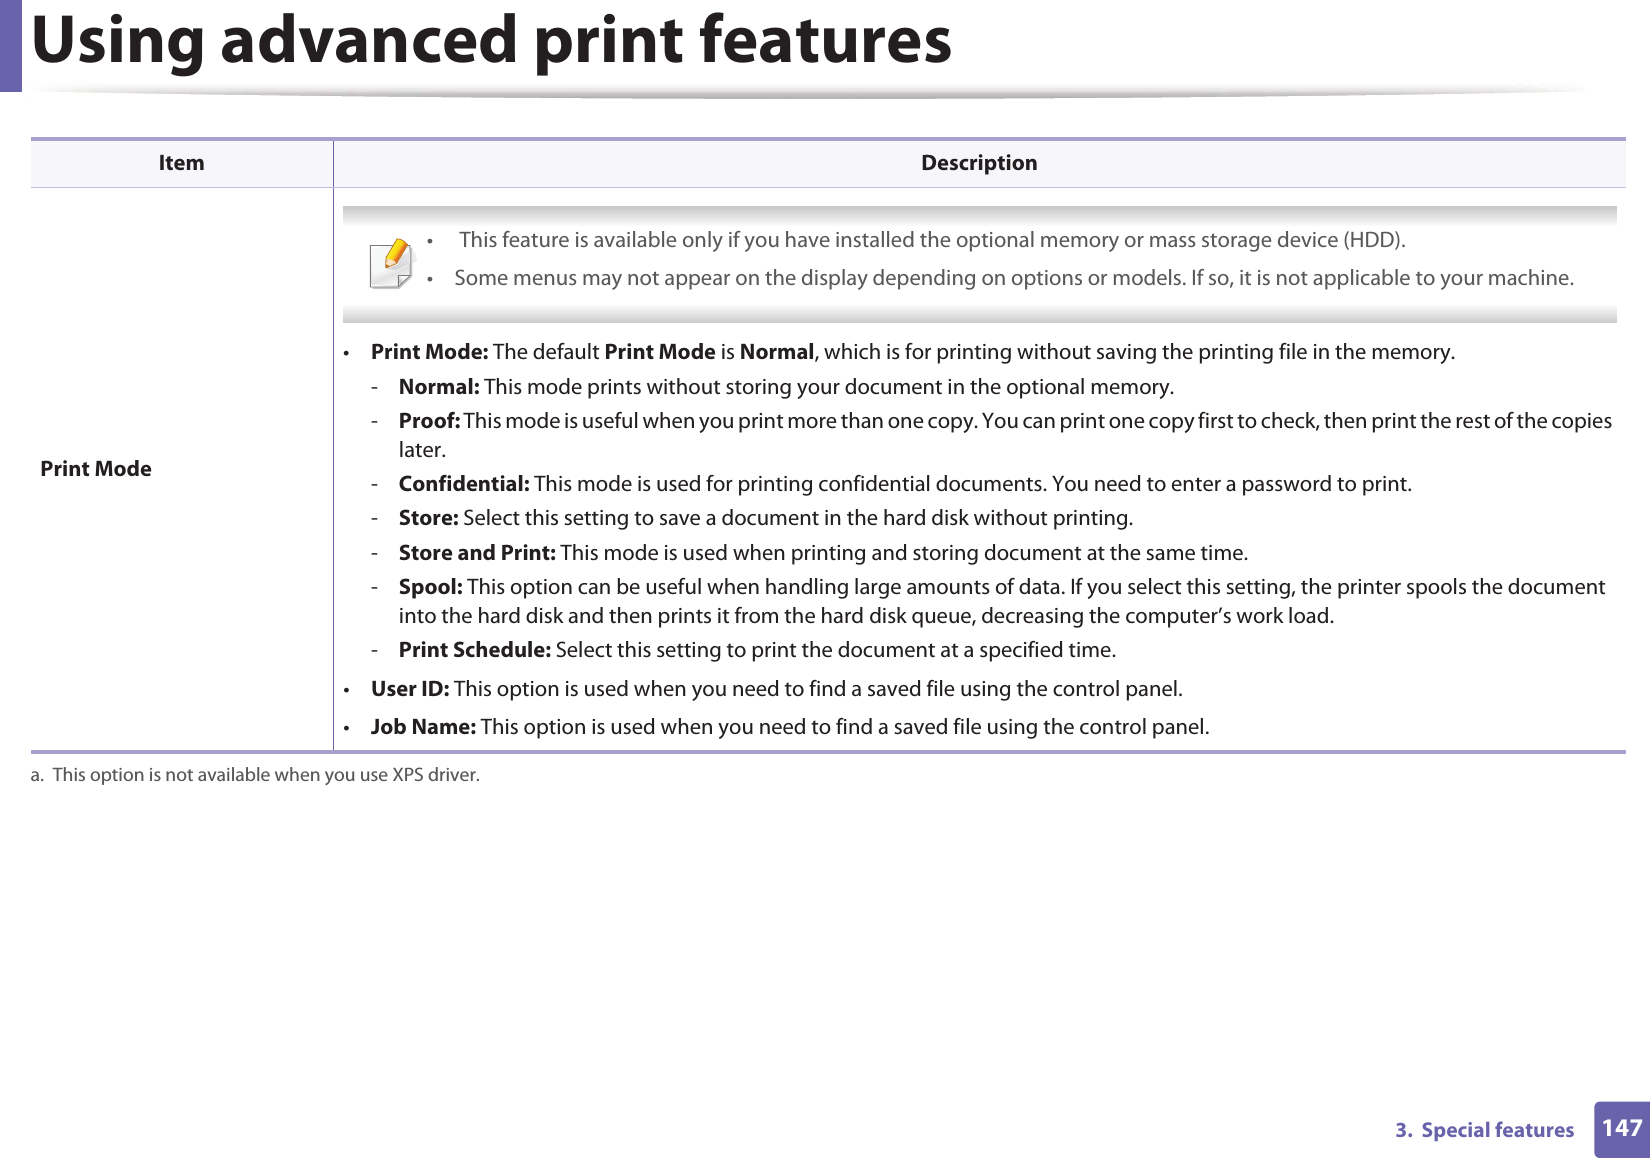 Using advanced print features1473.  Special features Print Mode •  This feature is available only if you have installed the optional memory or mass storage device (HDD).• Some menus may not appear on the display depending on options or models. If so, it is not applicable to your machine. •Print Mode: The default Print Mode is Normal, which is for printing without saving the printing file in the memory. -Normal: This mode prints without storing your document in the optional memory. -Proof: This mode is useful when you print more than one copy. You can print one copy first to check, then print the rest of the copies later. -Confidential: This mode is used for printing confidential documents. You need to enter a password to print. -Store: Select this setting to save a document in the hard disk without printing. -Store and Print: This mode is used when printing and storing document at the same time.-Spool: This option can be useful when handling large amounts of data. If you select this setting, the printer spools the document into the hard disk and then prints it from the hard disk queue, decreasing the computer’s work load.-Print Schedule: Select this setting to print the document at a specified time.•User ID: This option is used when you need to find a saved file using the control panel. •Job Name: This option is used when you need to find a saved file using the control panel. a. This option is not available when you use XPS driver.Item Description